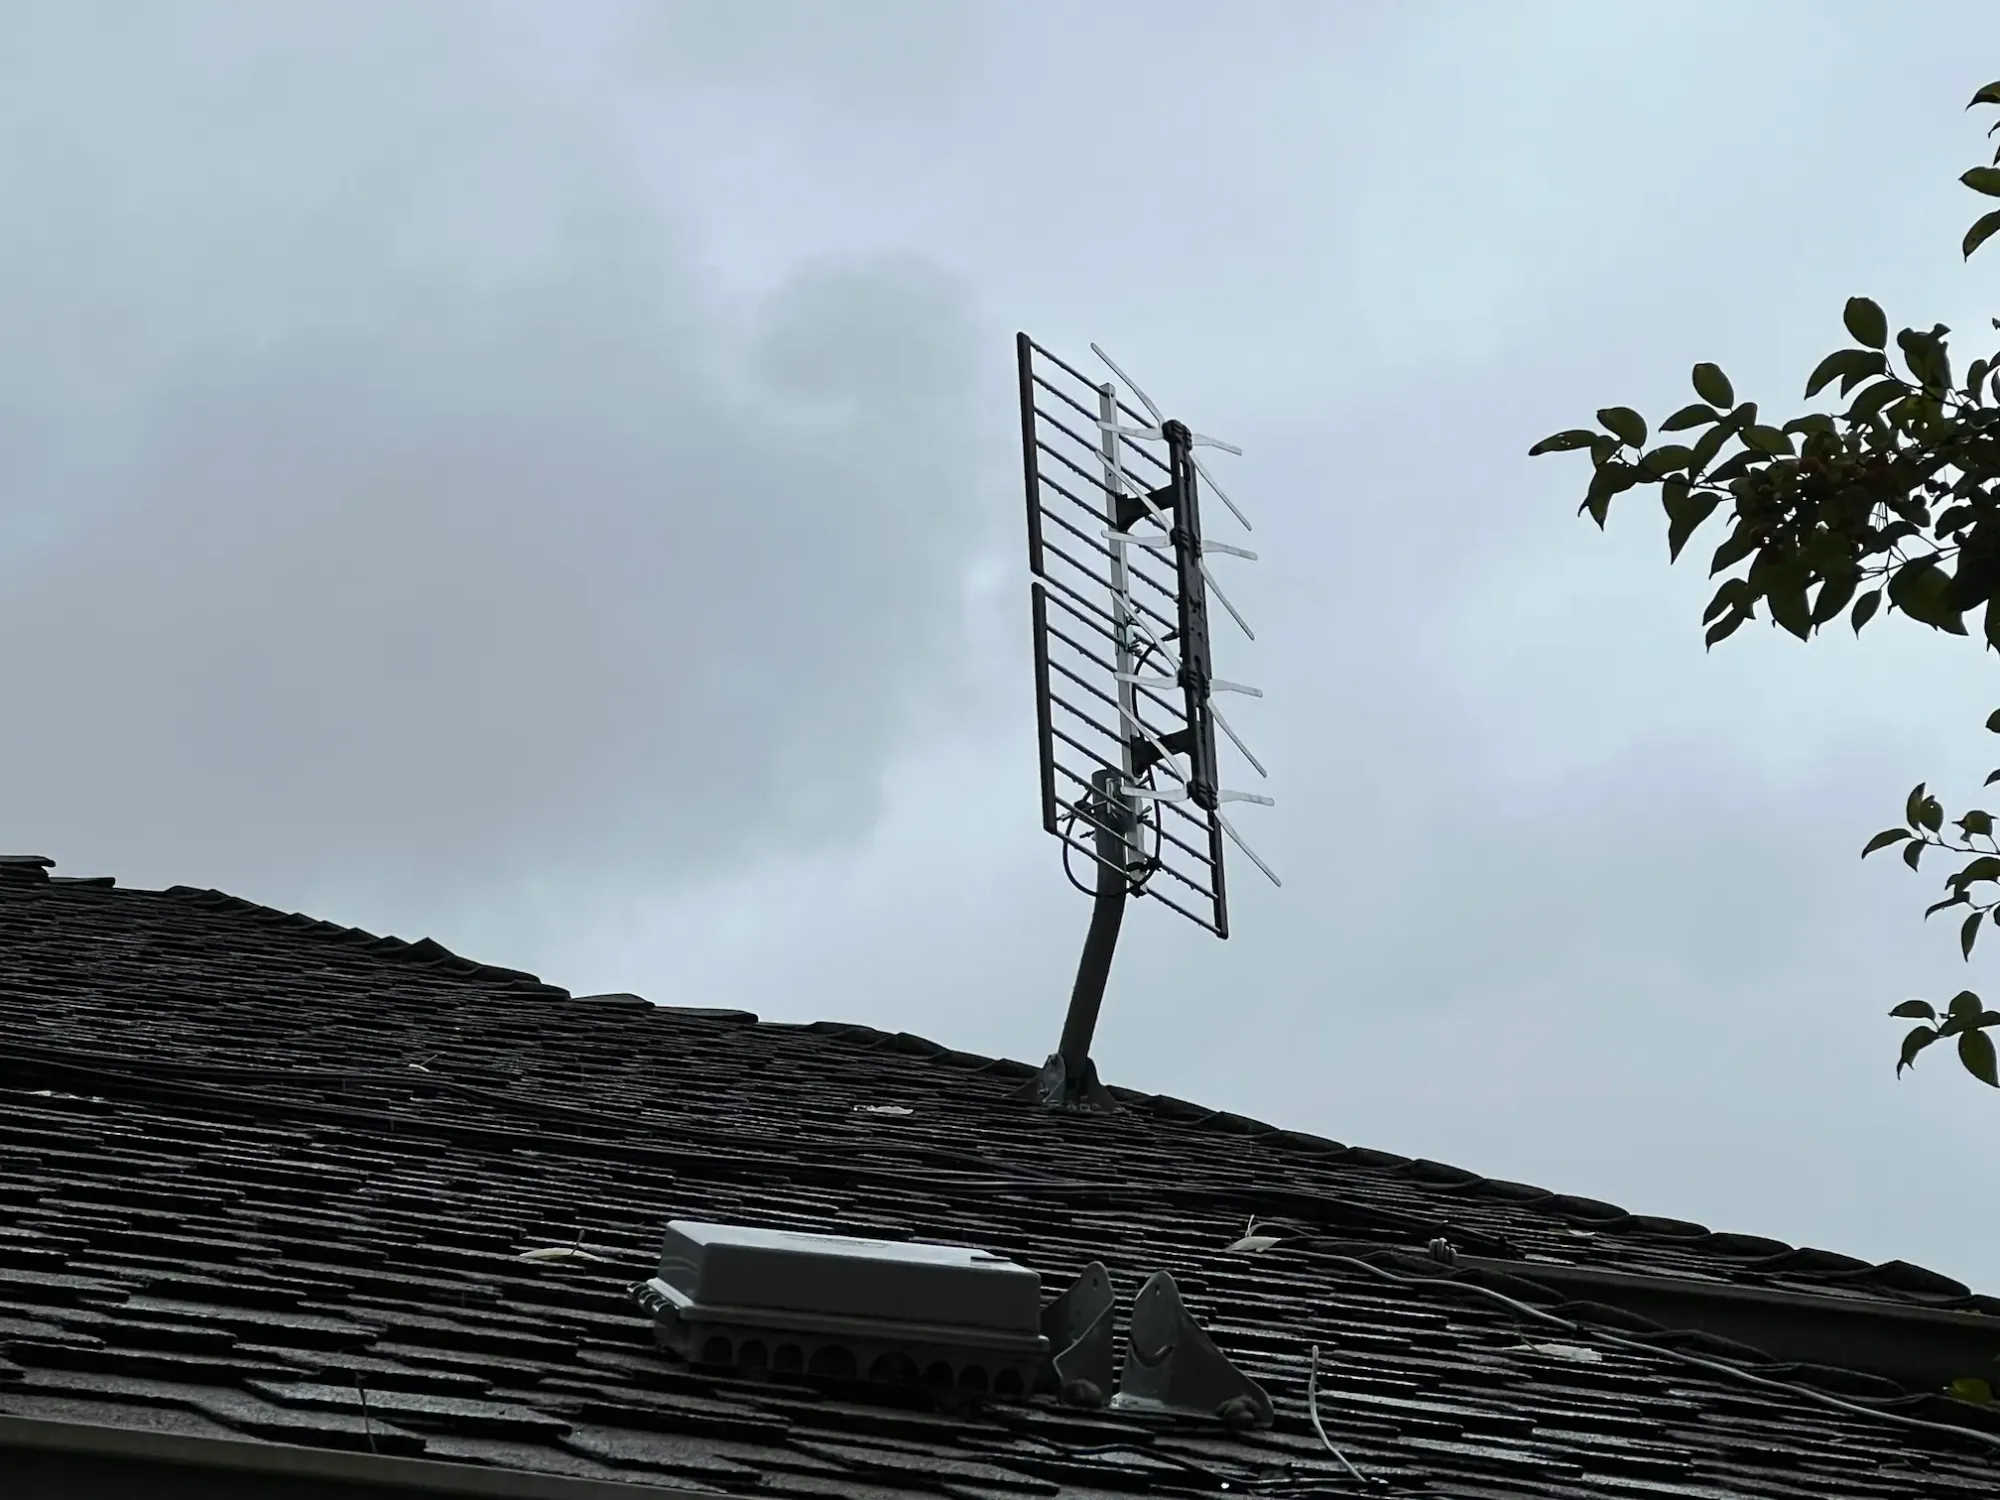 Our new over-the-air (OTA) television antenna